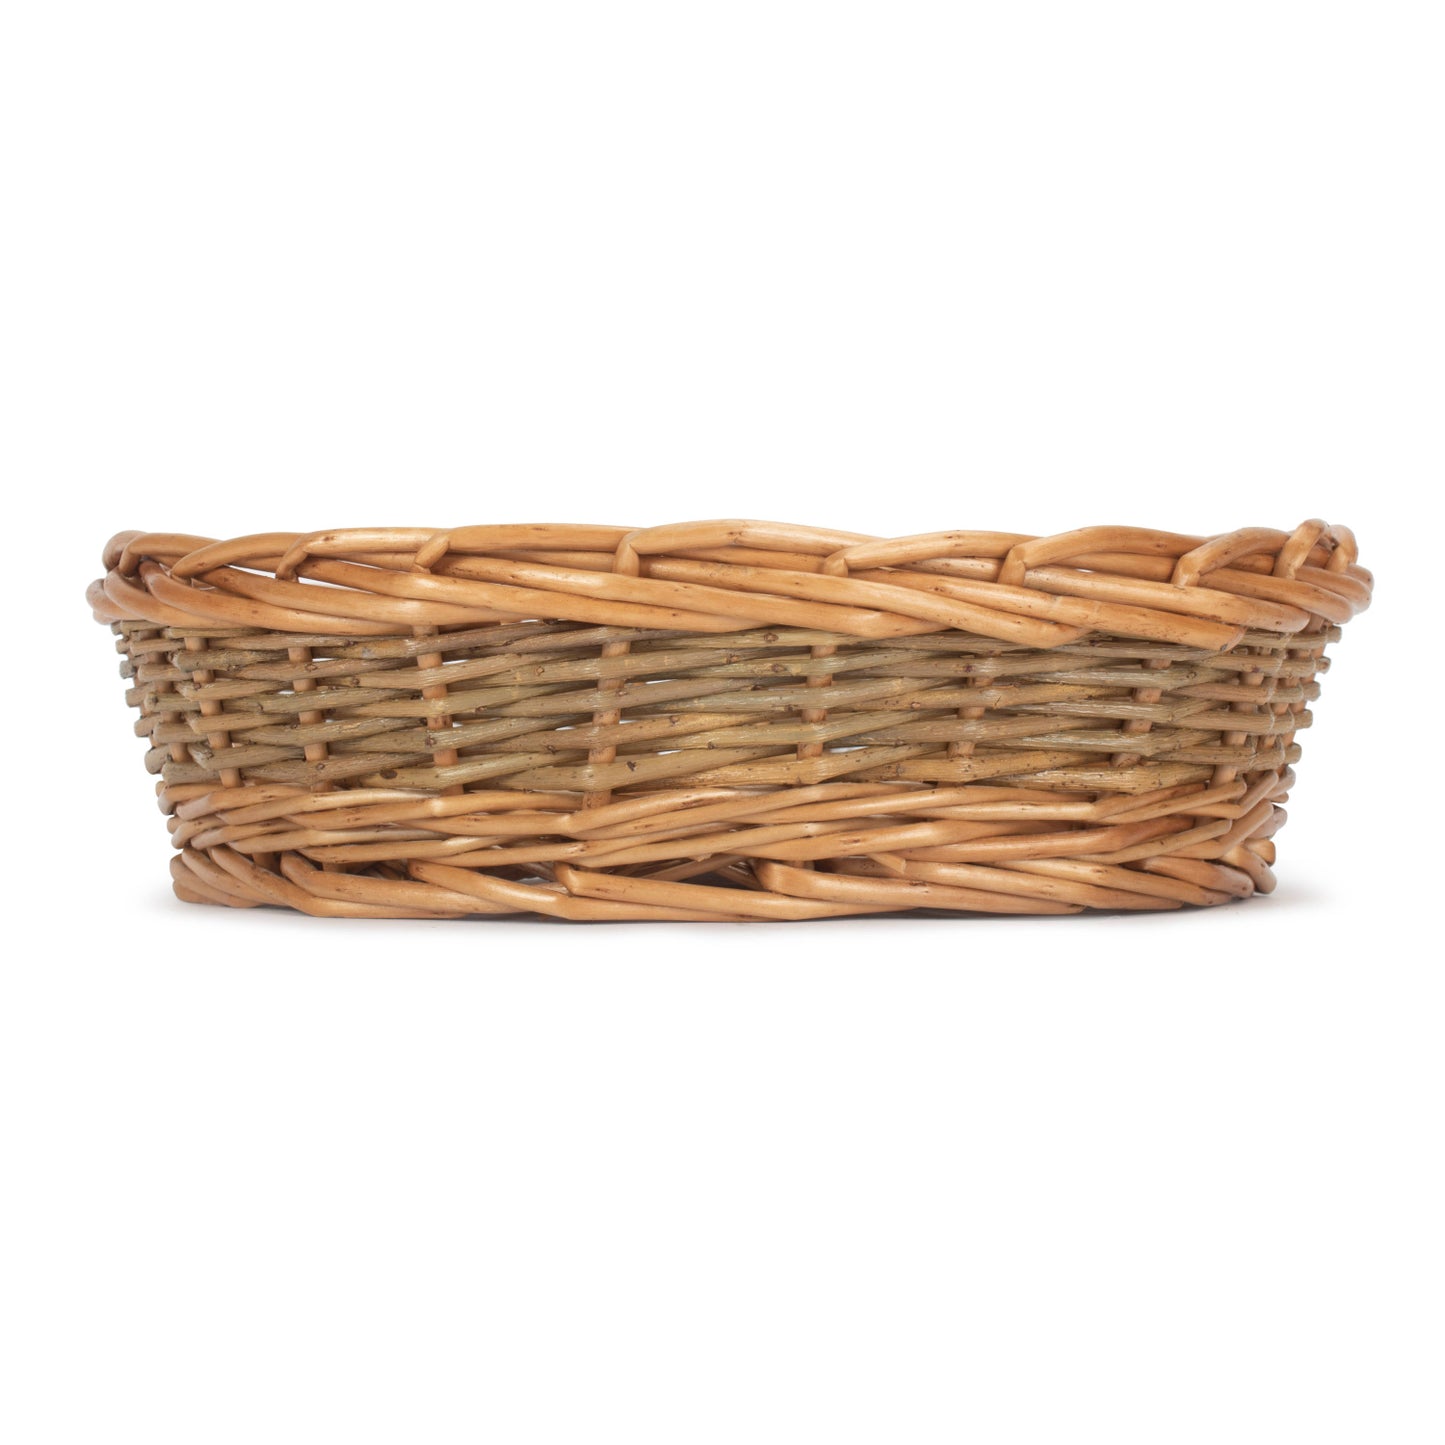 Large Unpeeled Willow Round Tray